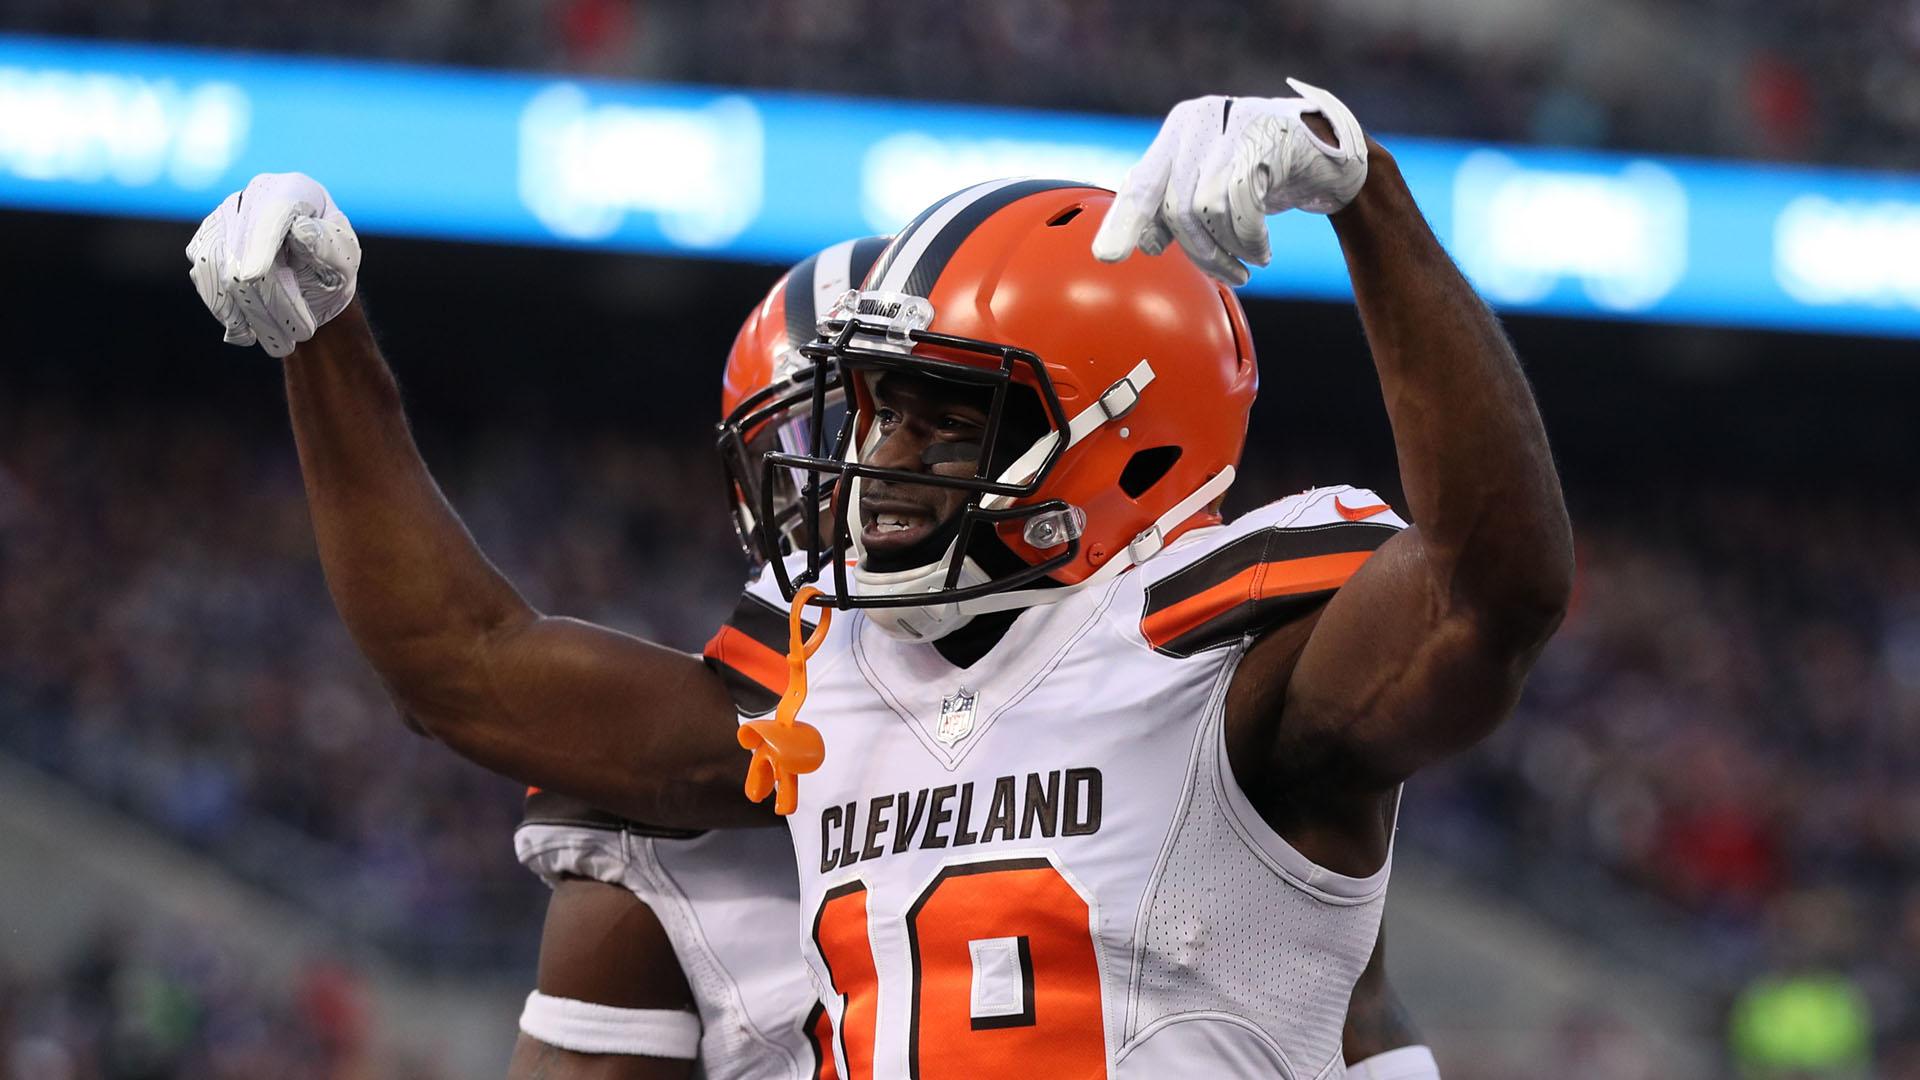 OBJ costs Perriman contract with Browns, report says